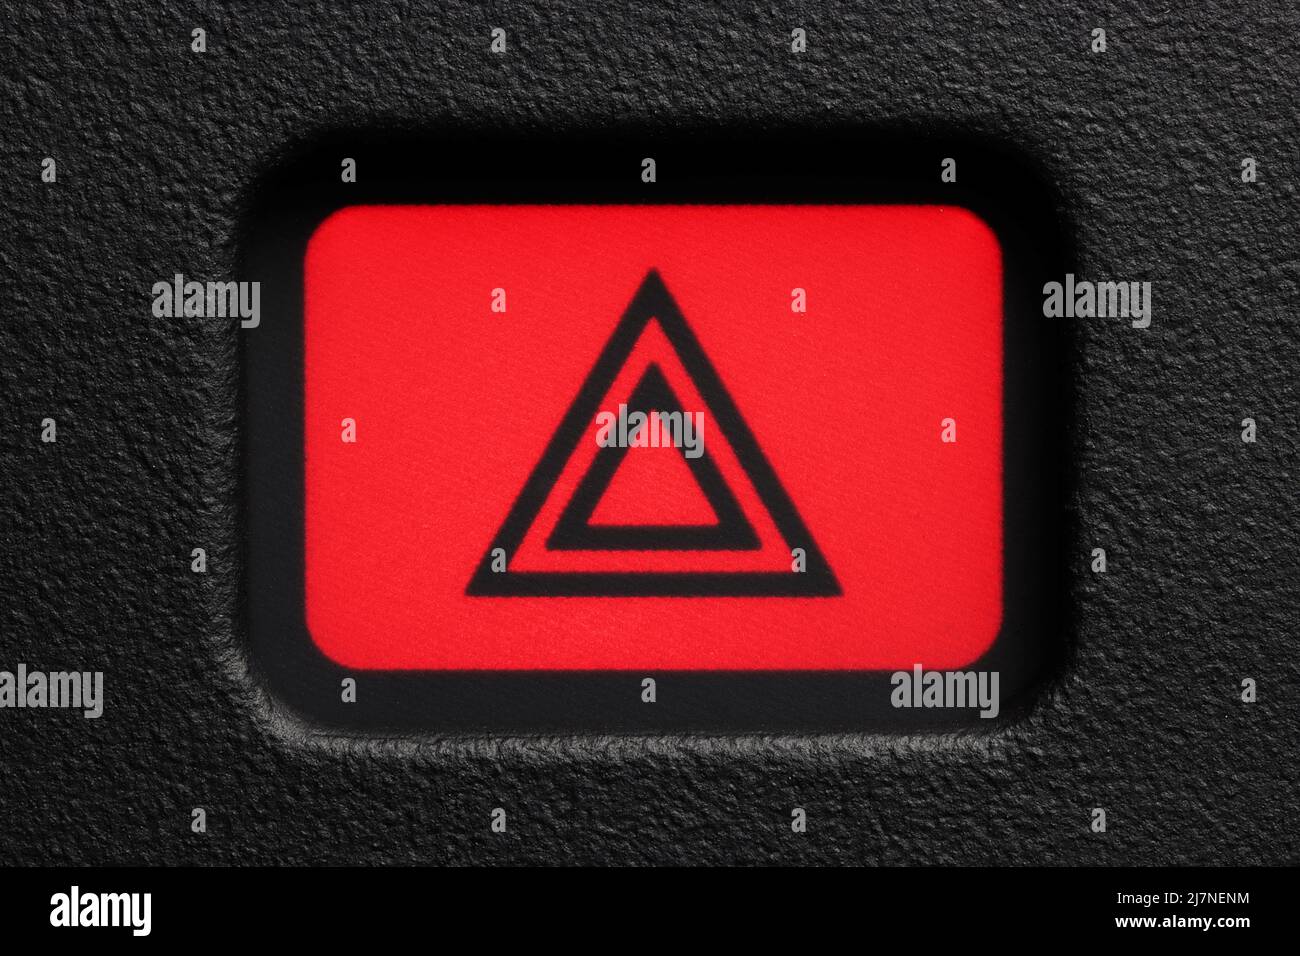 Warning Light Red Button. Car Dashboard Element on Black